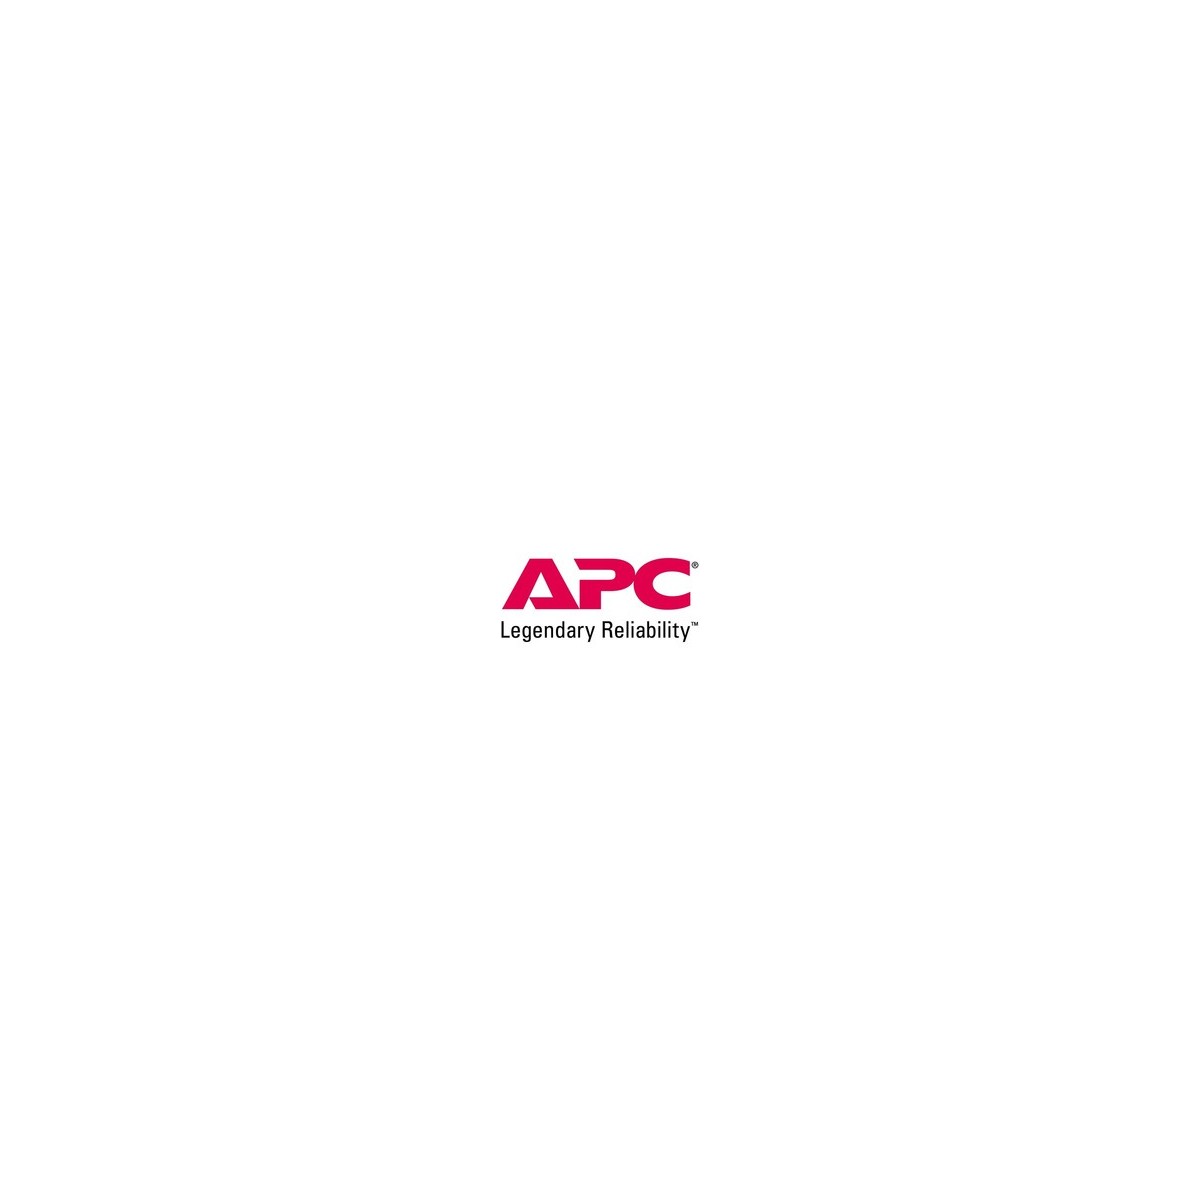 APC Scheduled Assembly Service 5x8 - 8x5